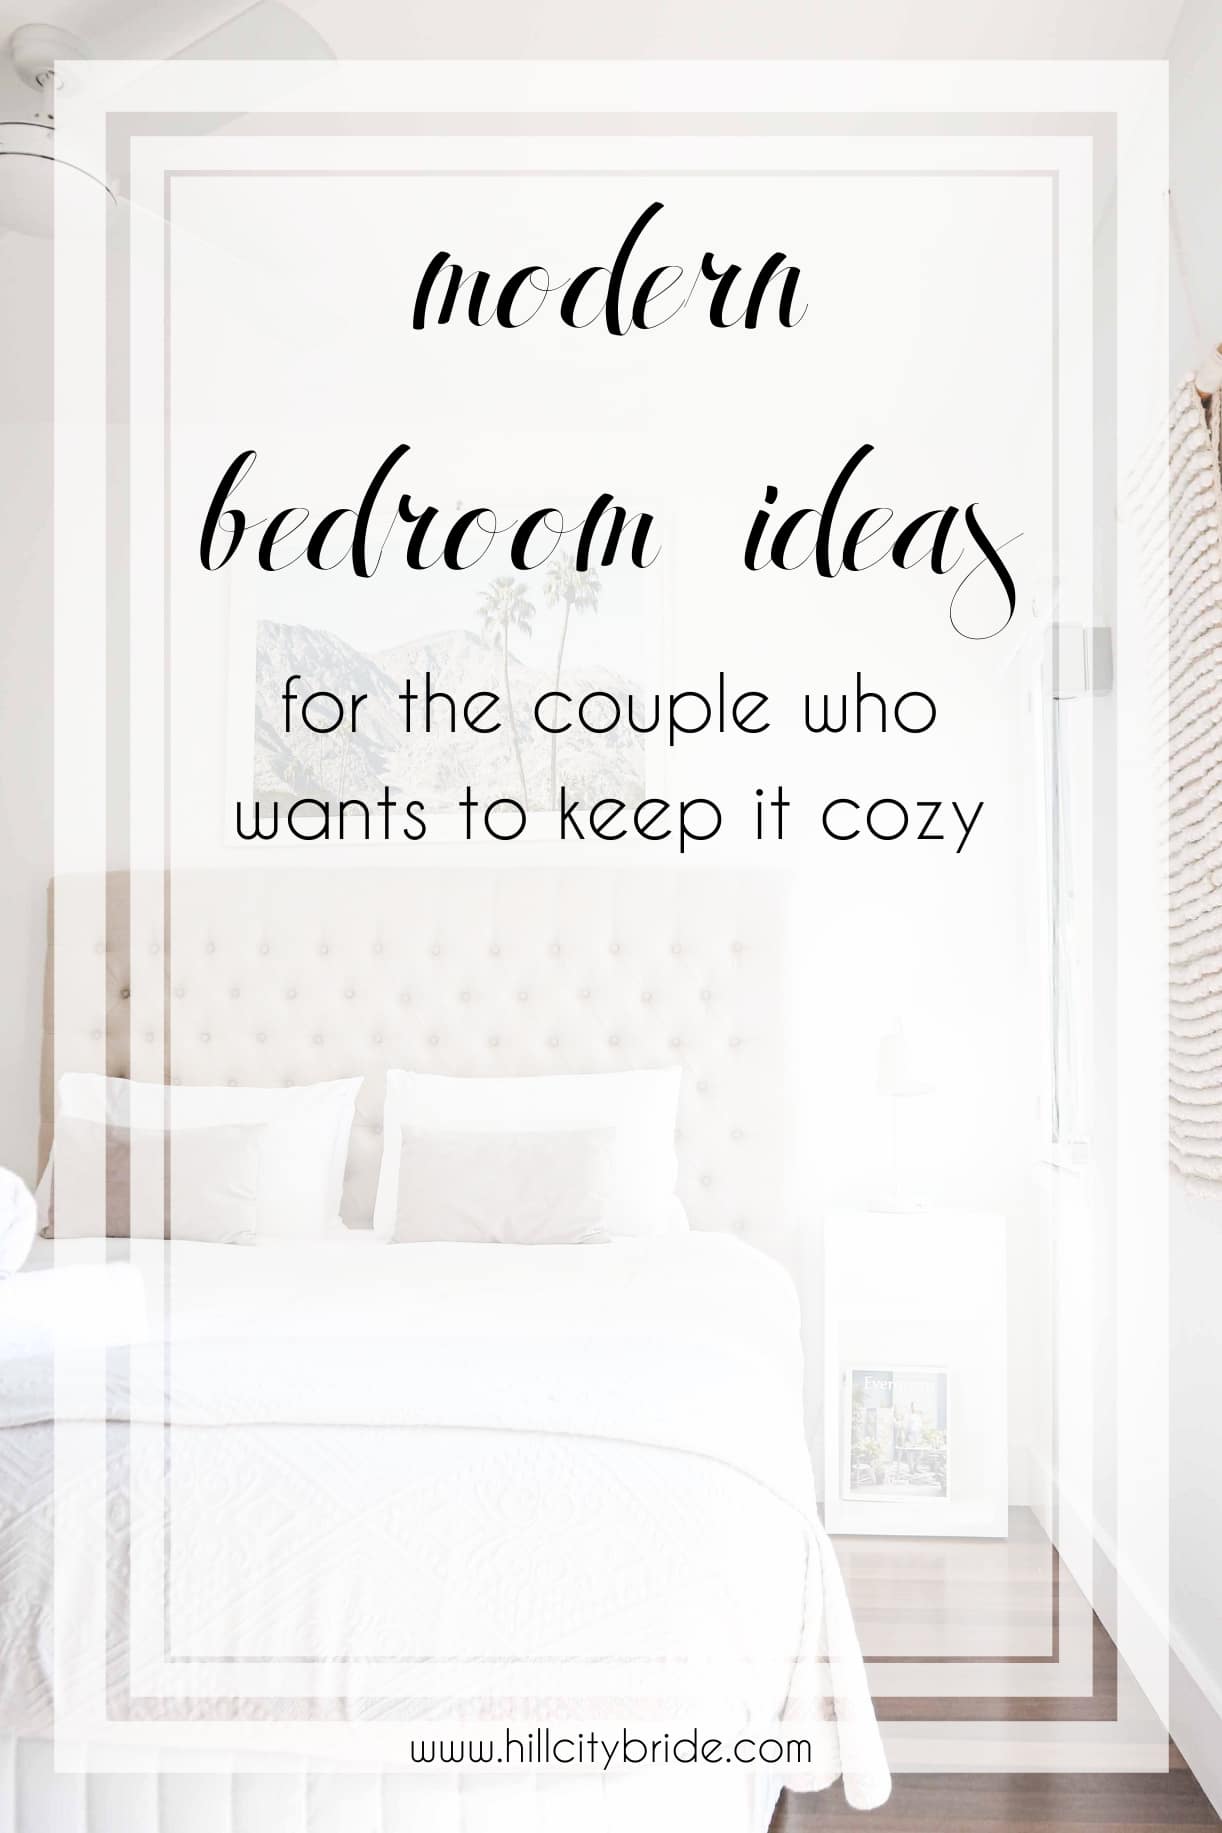 Modern Bedroom Ideas for the Couple Who Wants to Keep it Cozy | Hill City Bride Virginia Weddings Blog Wedding